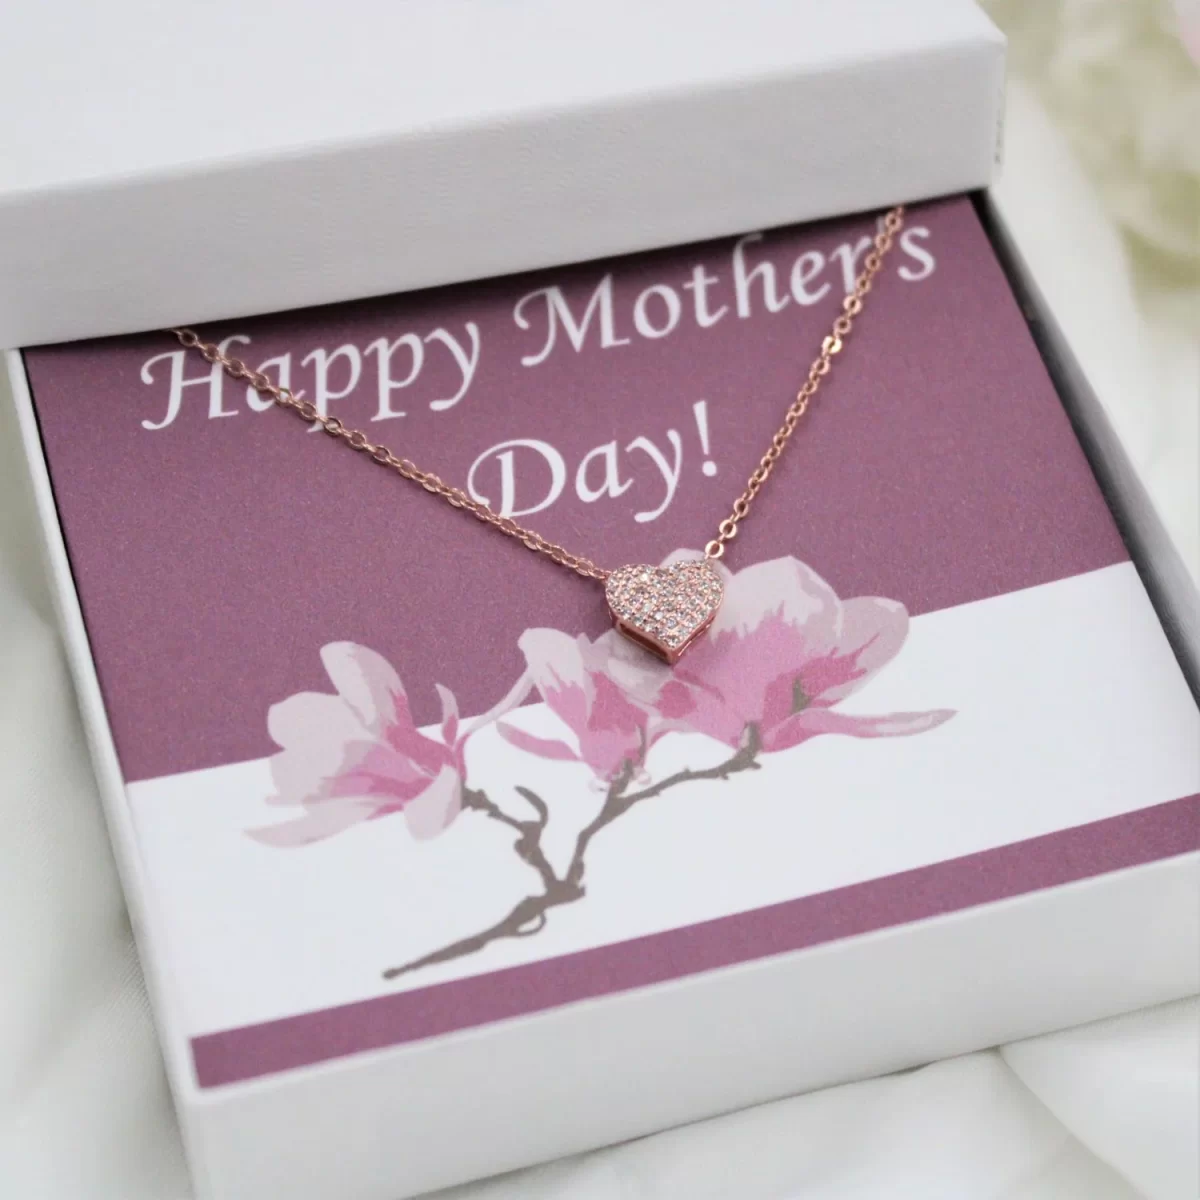 20 Inexpensive Mother's Day Gifts That Won't Break The Bank